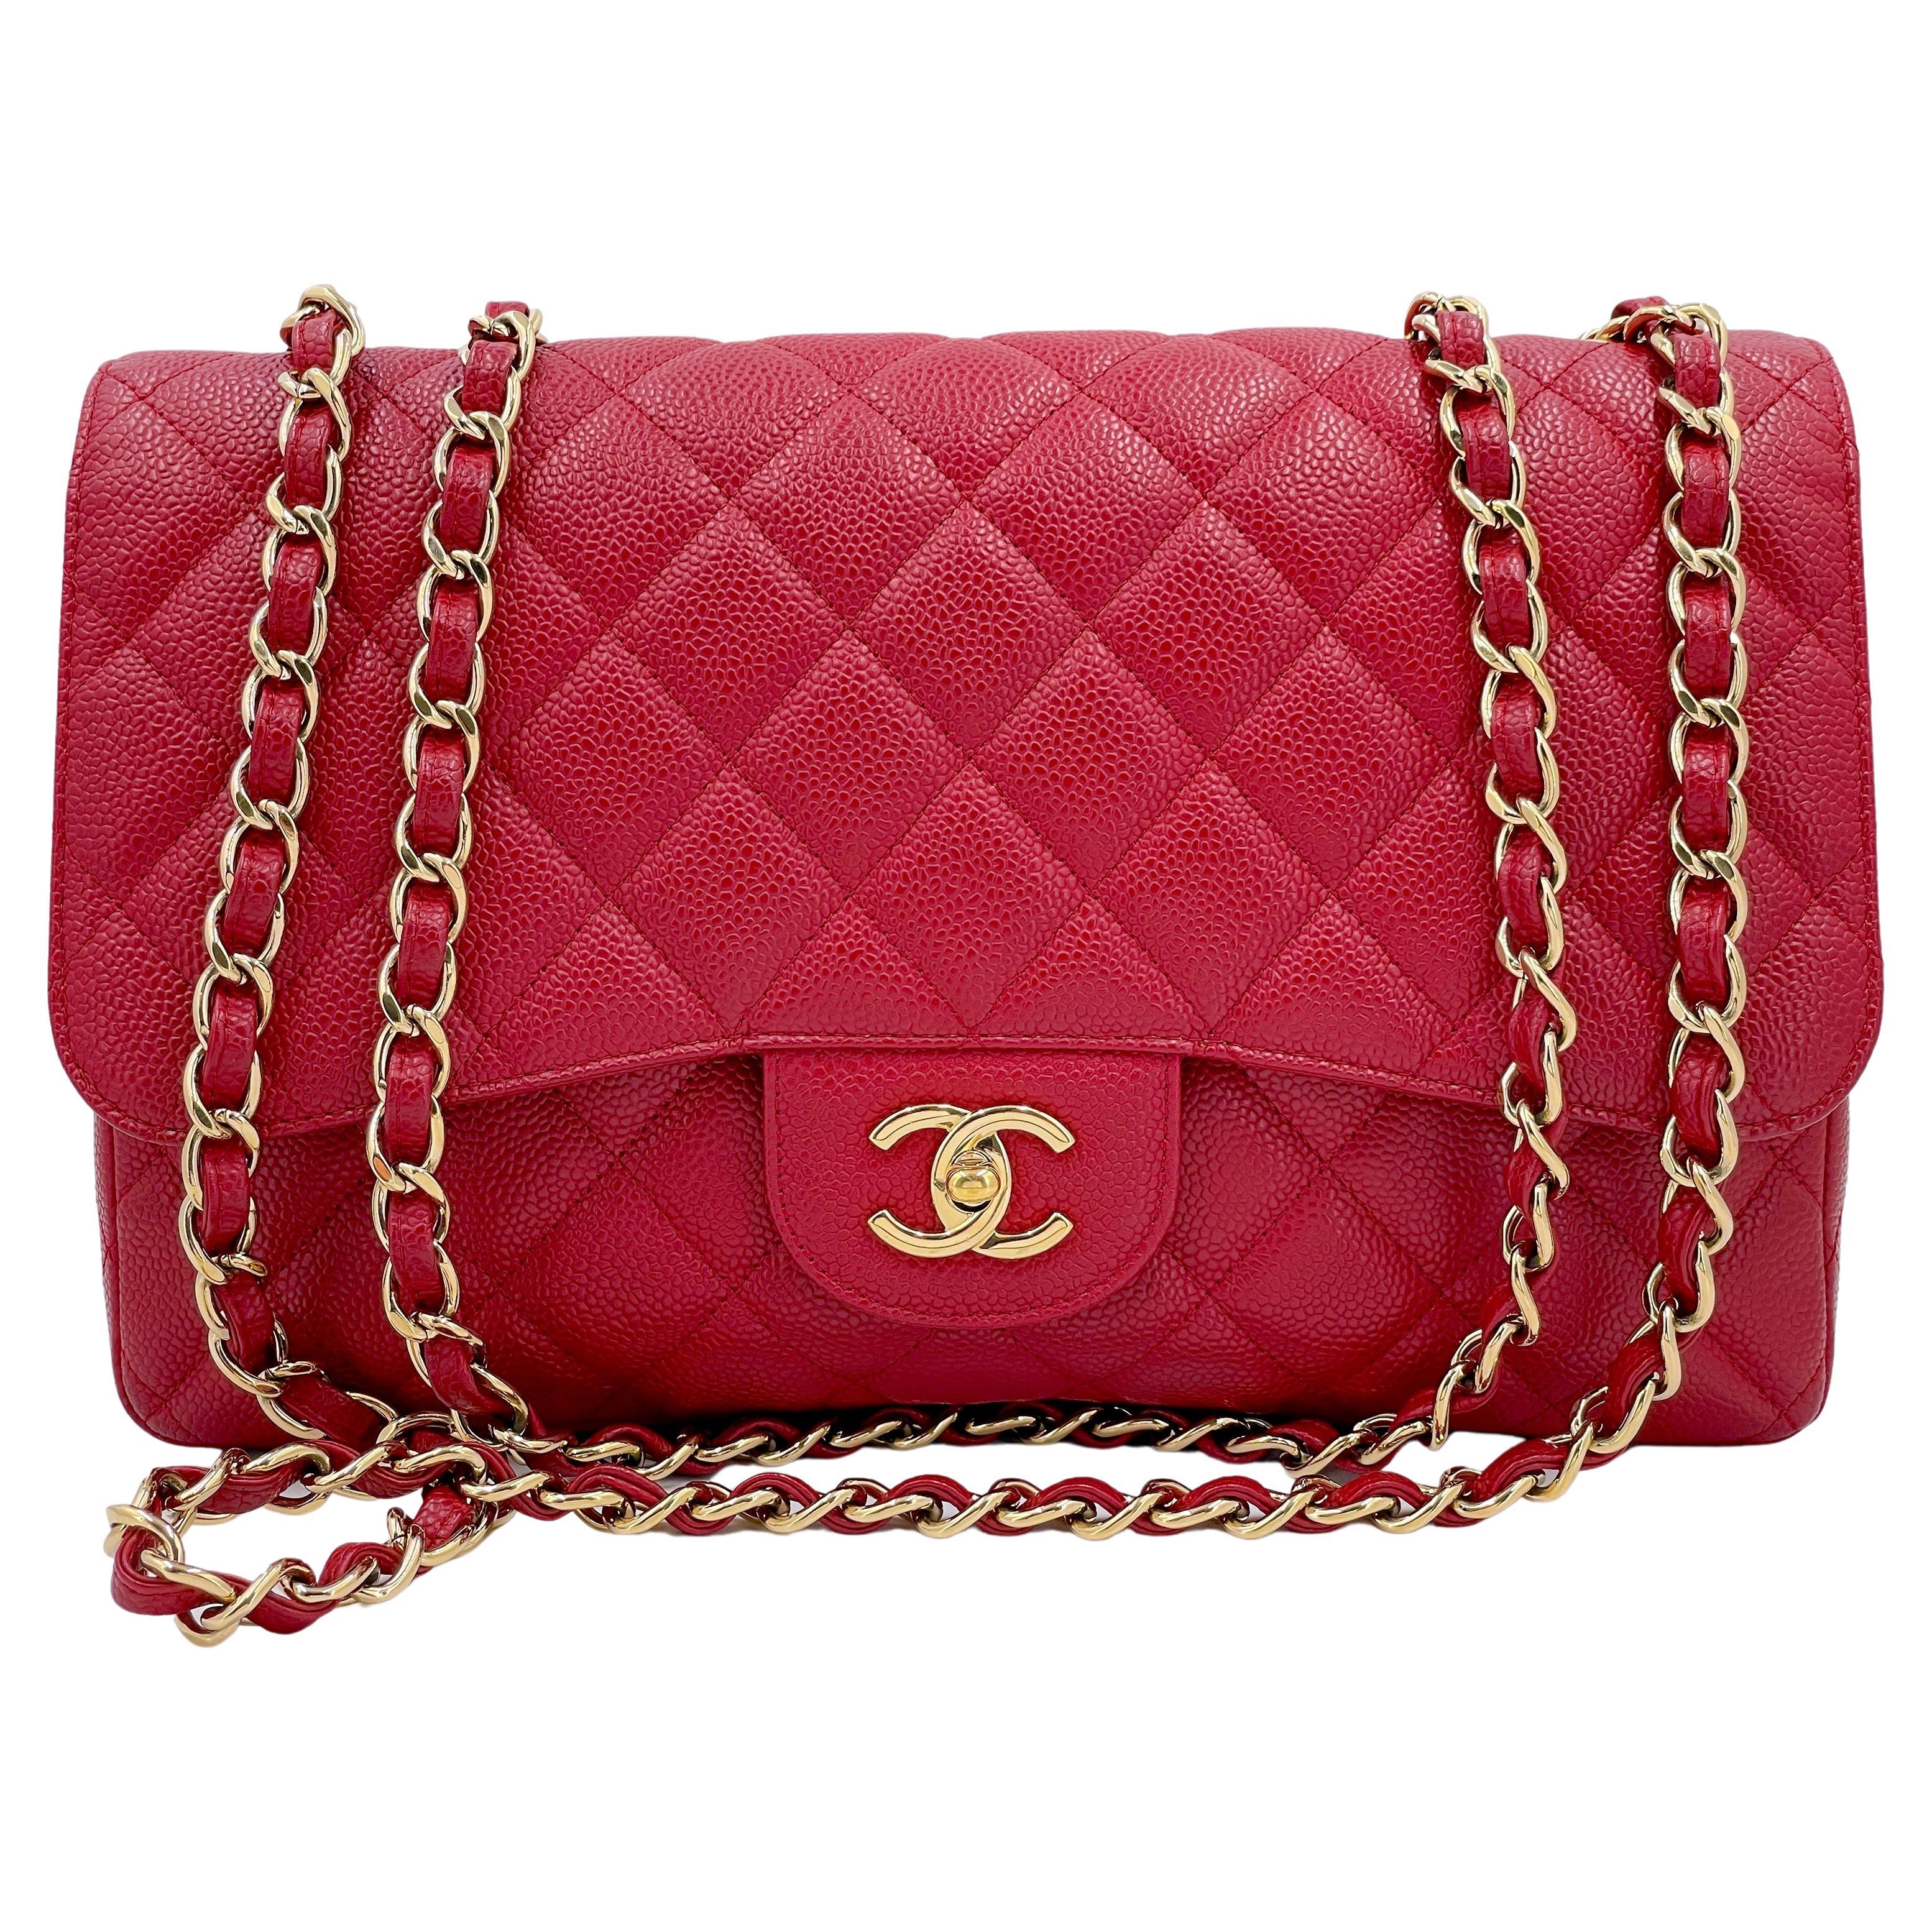 2009 Chanel Classic Flap - 164 For Sale on 1stDibs